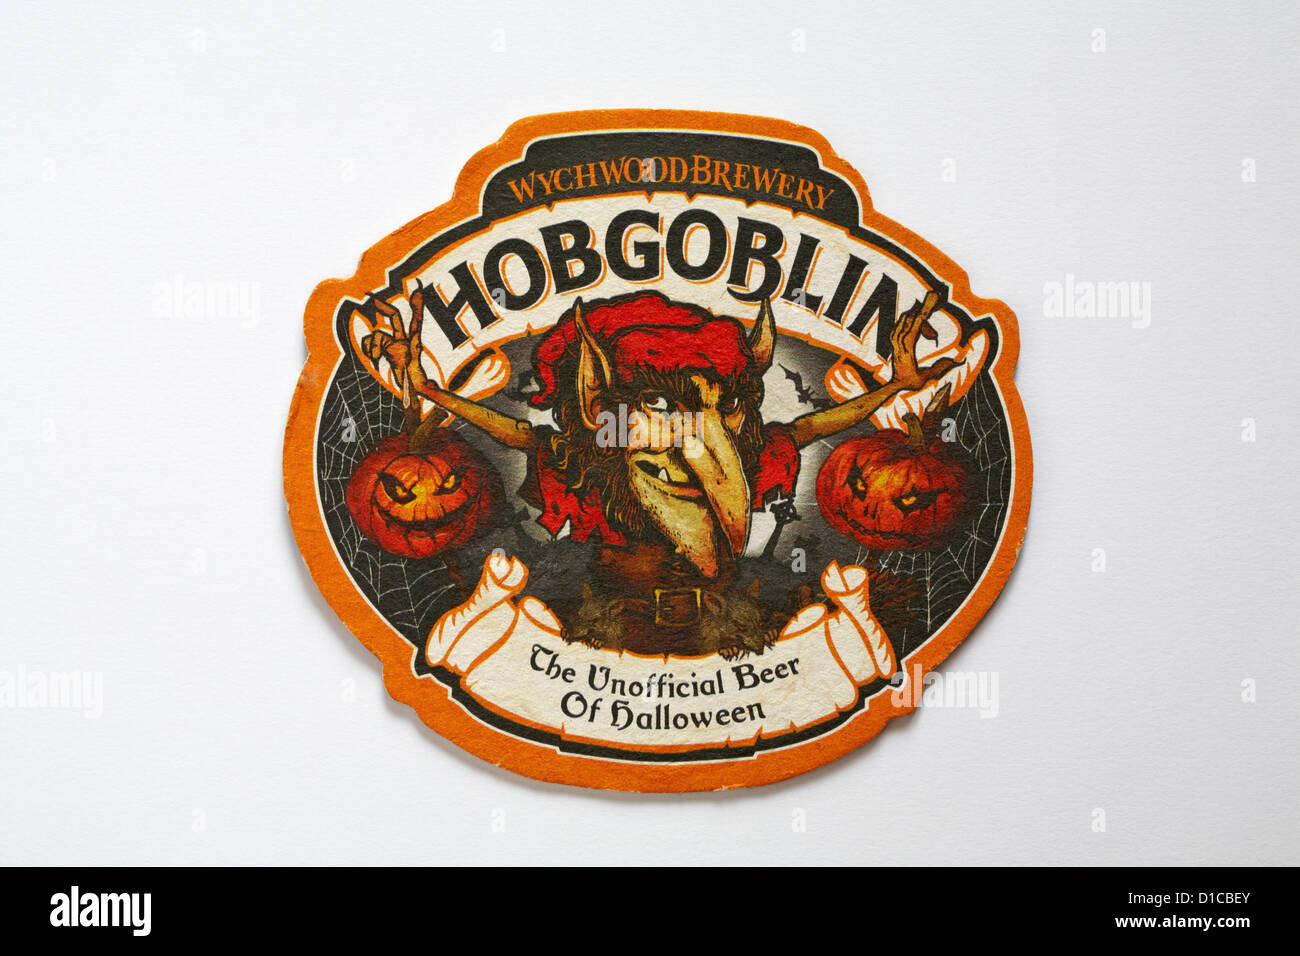 Beer mat Wychwood Brewery Hobgoblin The Unofficial Beer of Halloween isolated on white background Stock Photo